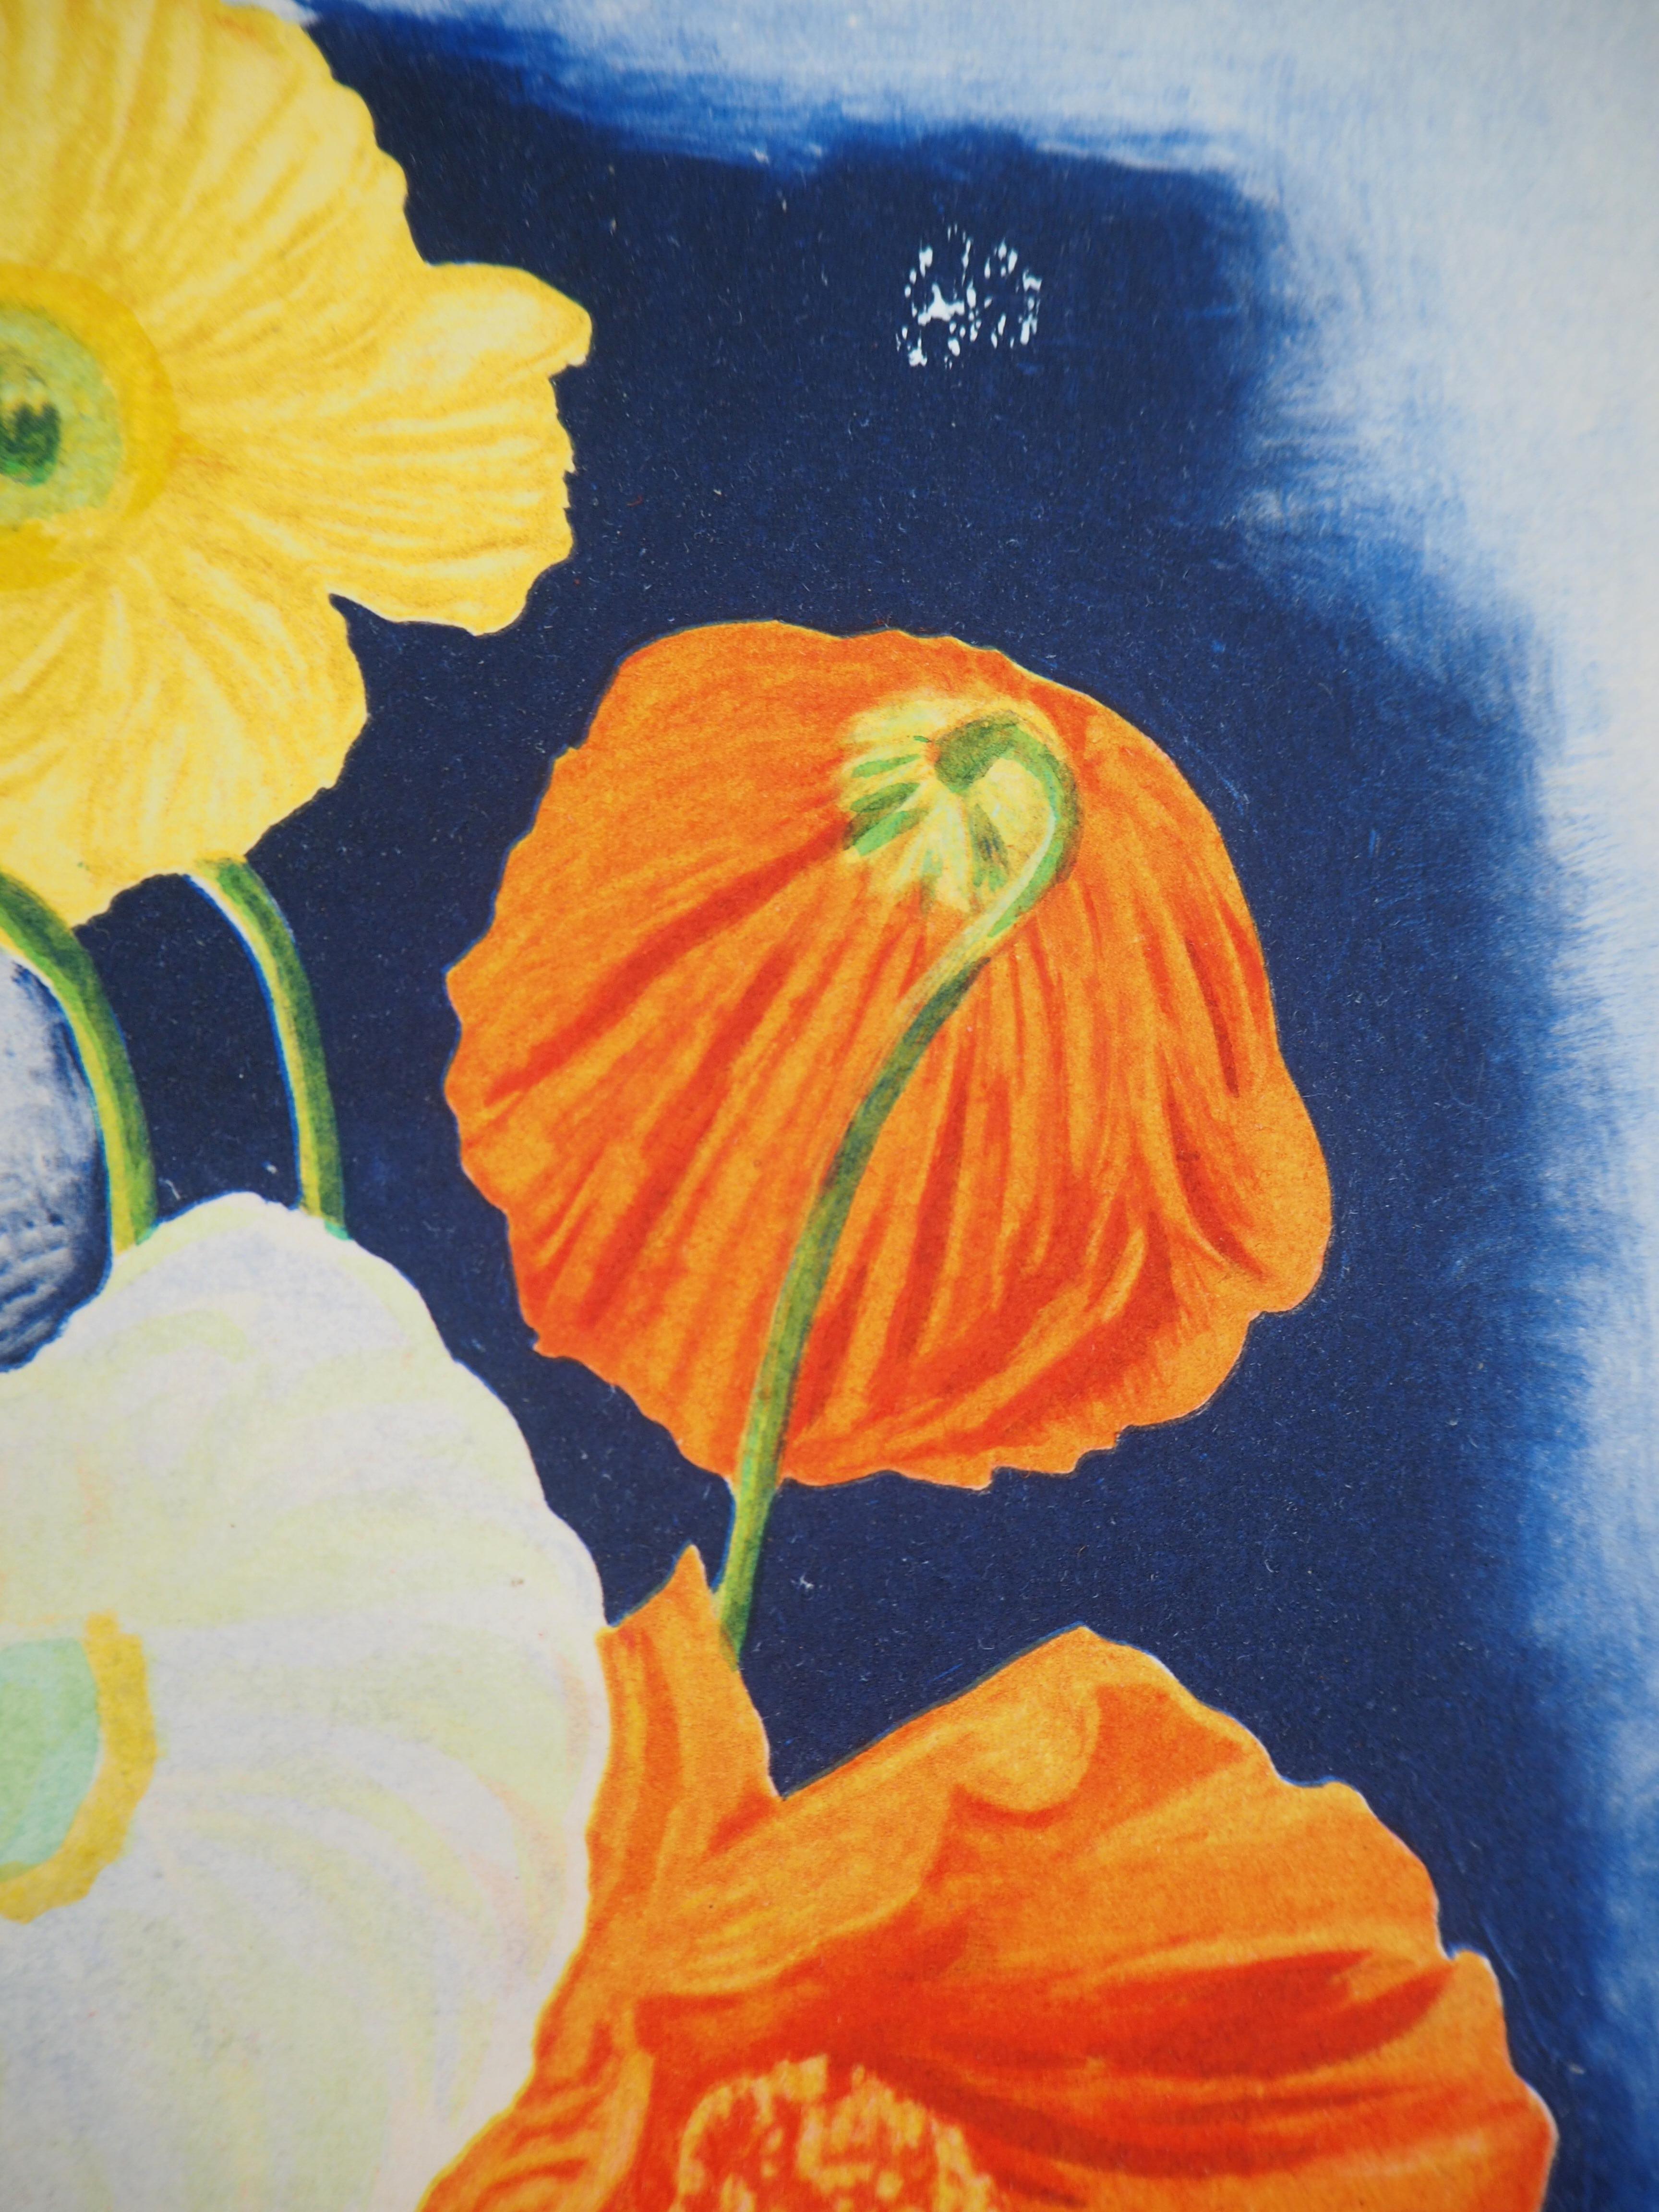 Bouquet of Poppies - Original Lithograph - Modern Print by Moise Kisling